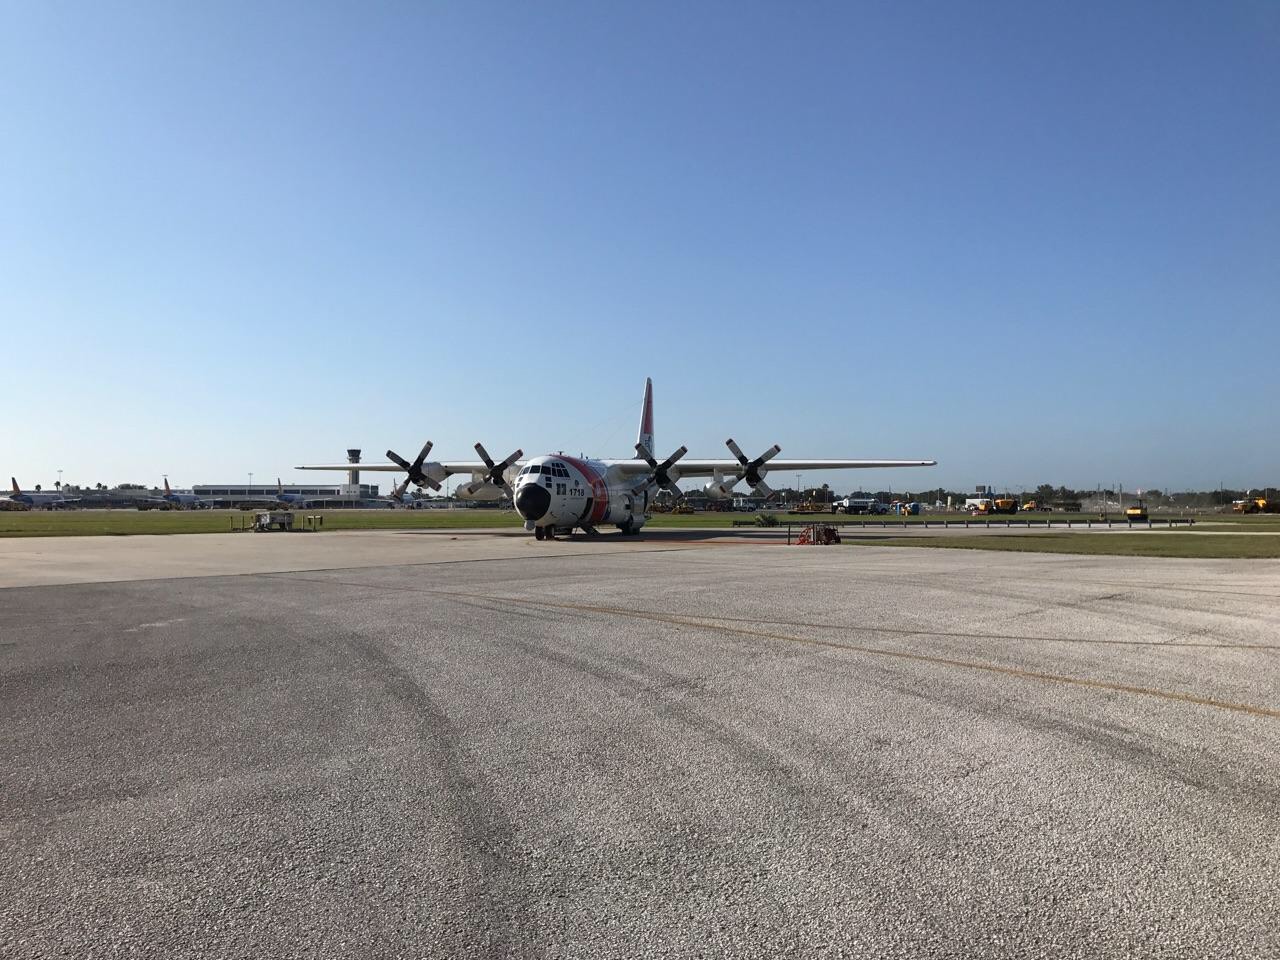 NOAA loads the MIST kit and crew on board the USCG C-130 aircraft at Naval Air Station Jacksonville.